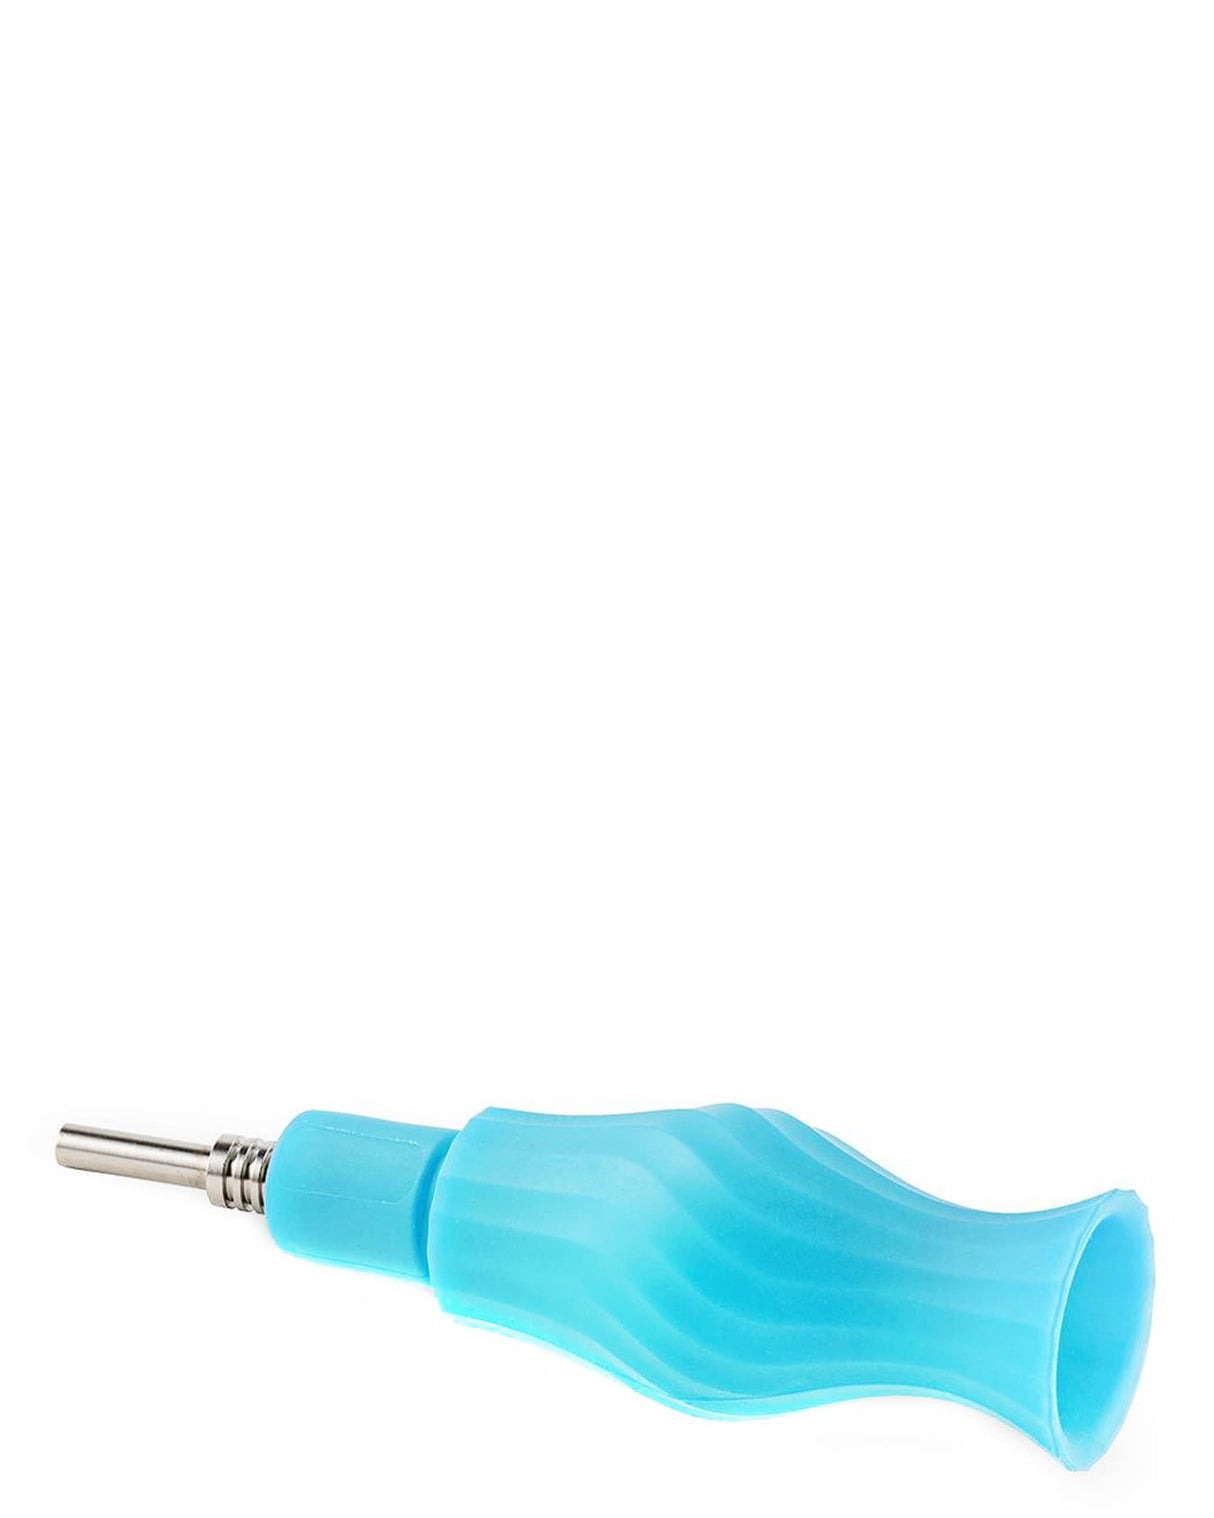 Ooze Clobb 4 in 1 Silicone Pipe in Teal with Quartz Bowl - Side View